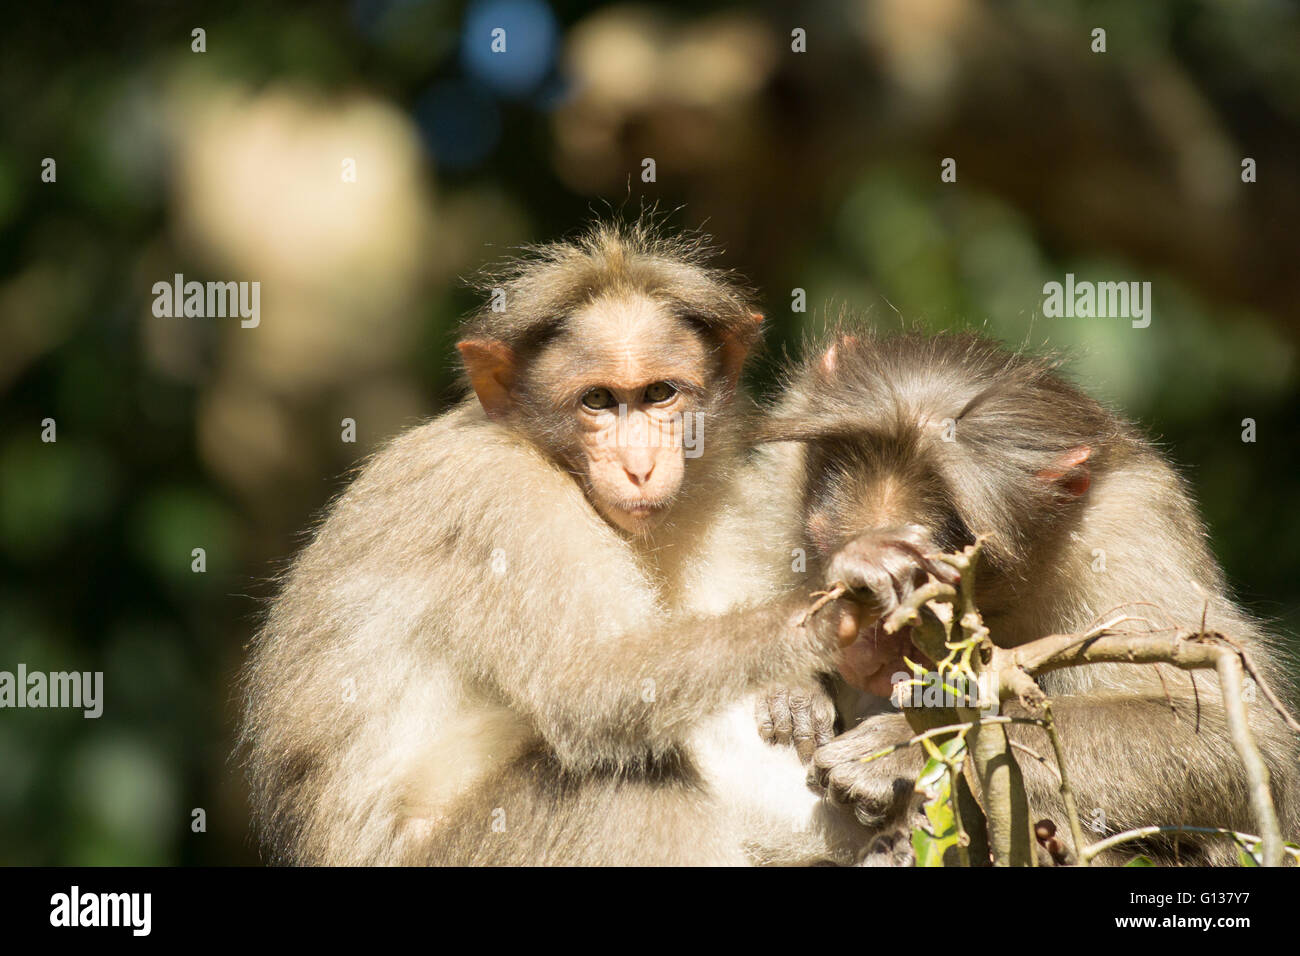 Young Bonnet Macaque (Macaca Radiata) being groomed by older Macaque Stock Photo